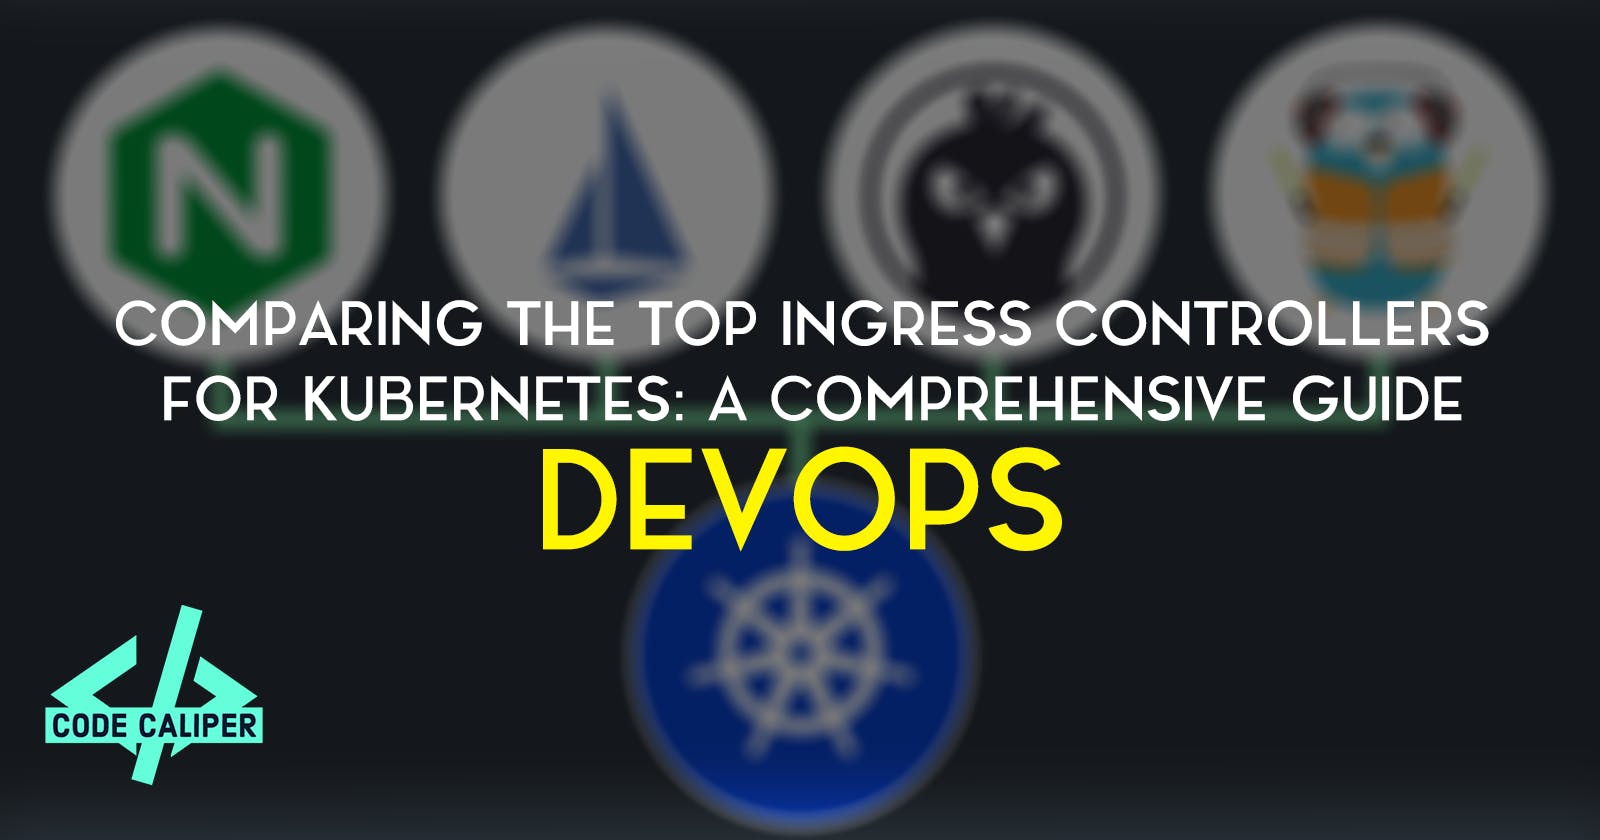 Comparing the Top Ingress Controllers for Kubernetes: A Comprehensive Guide